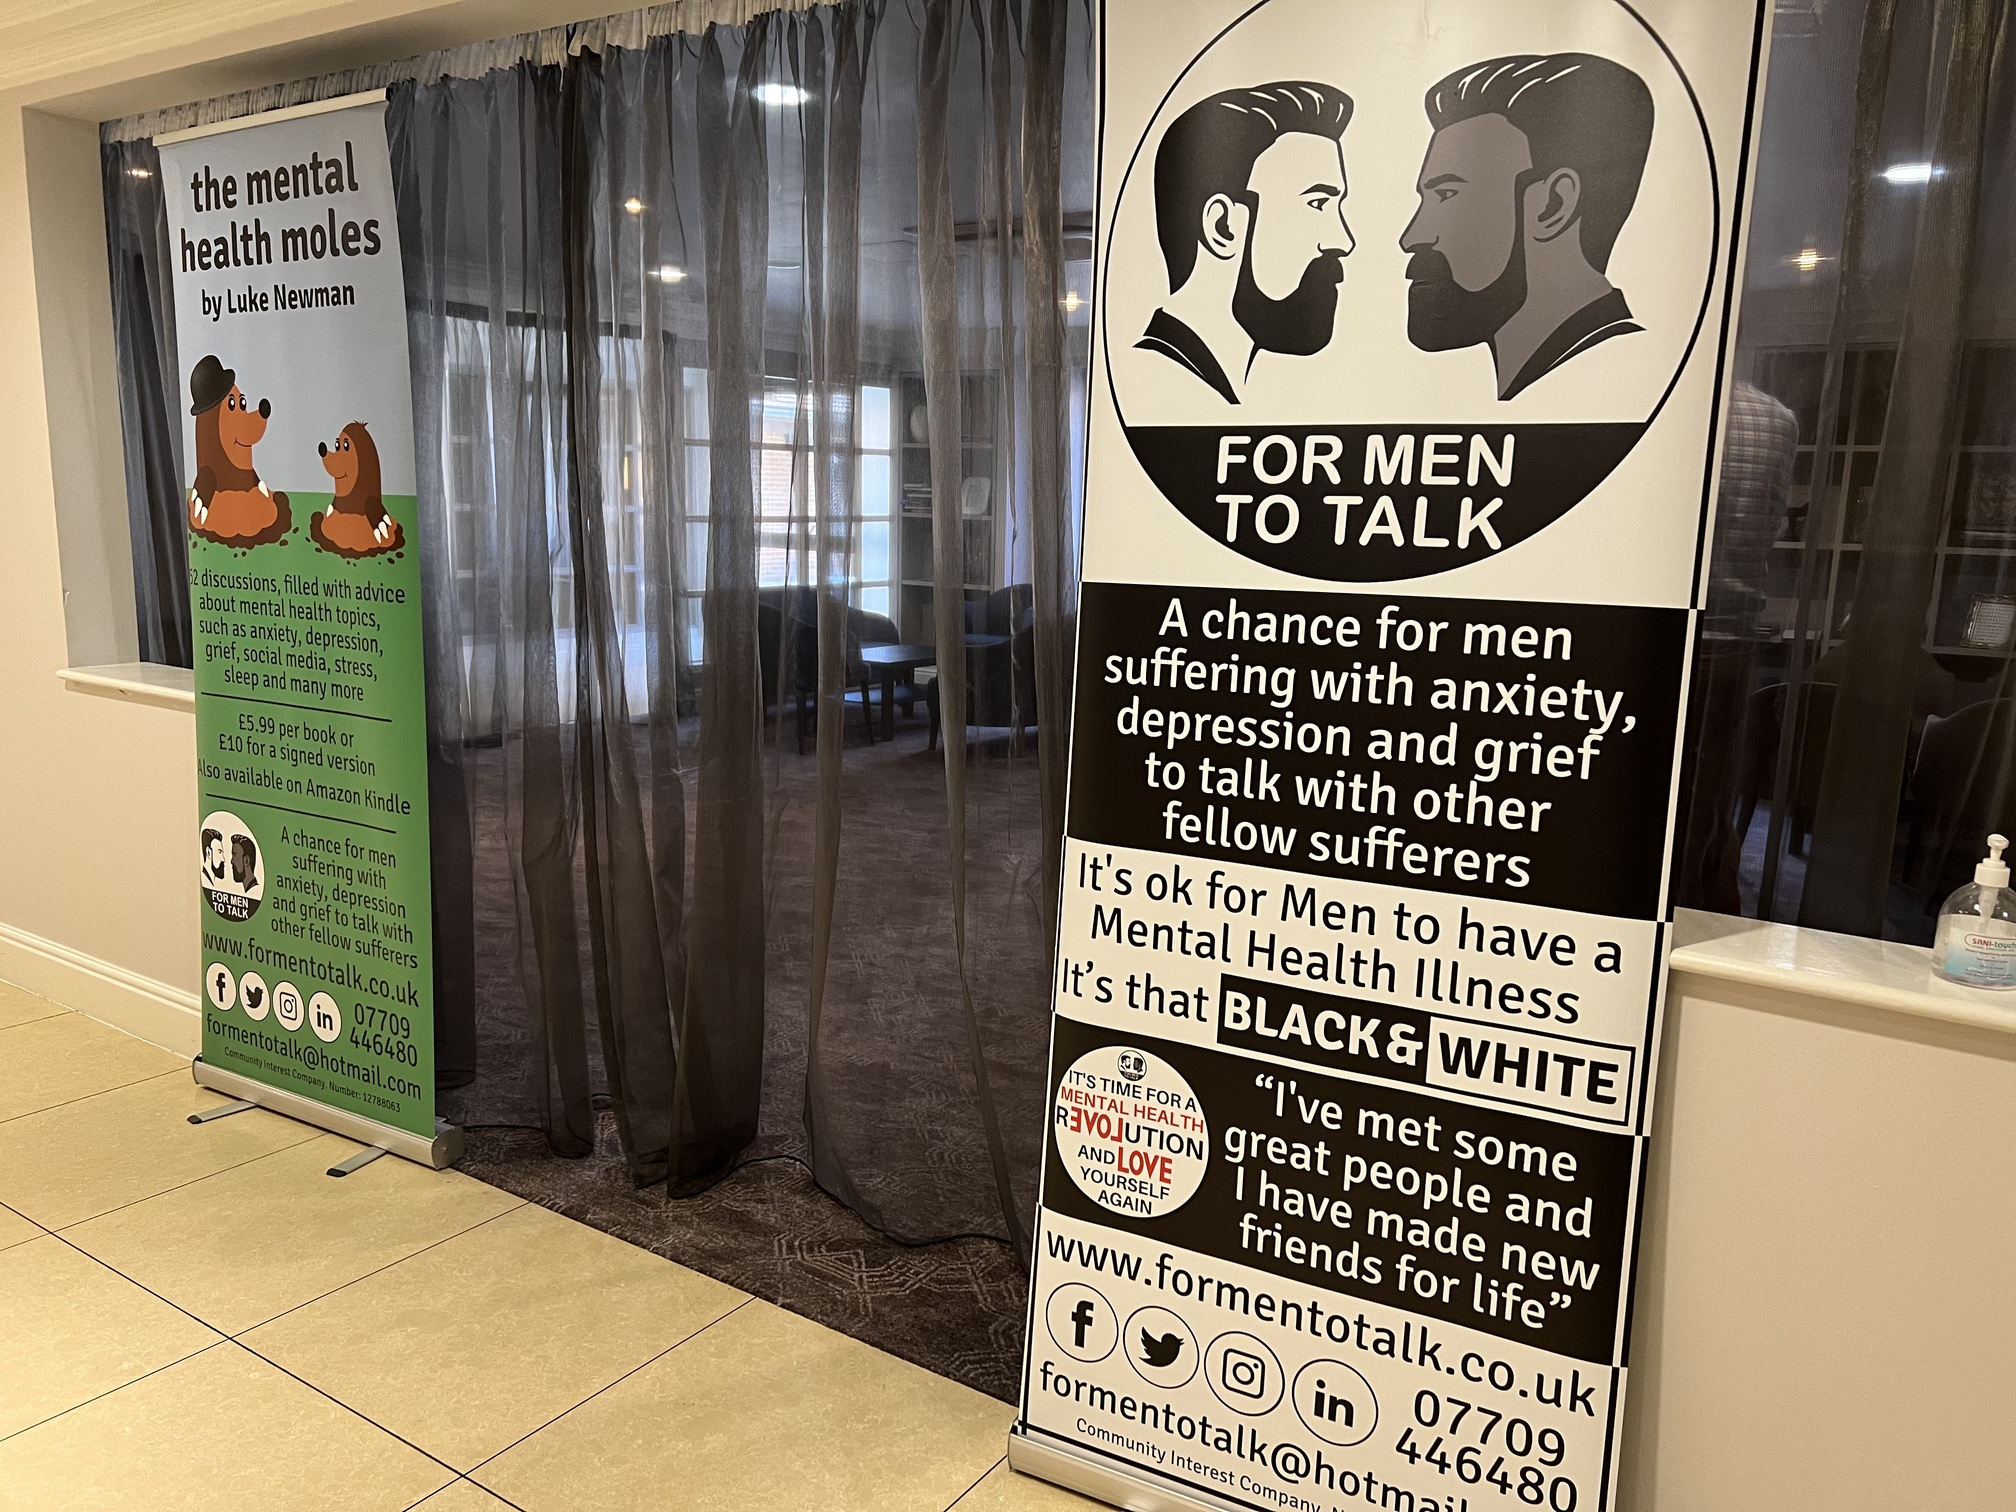 Men struggling with mental health urged to reach out to ‘For Men To Talk’ in Cambourne and St.Neots